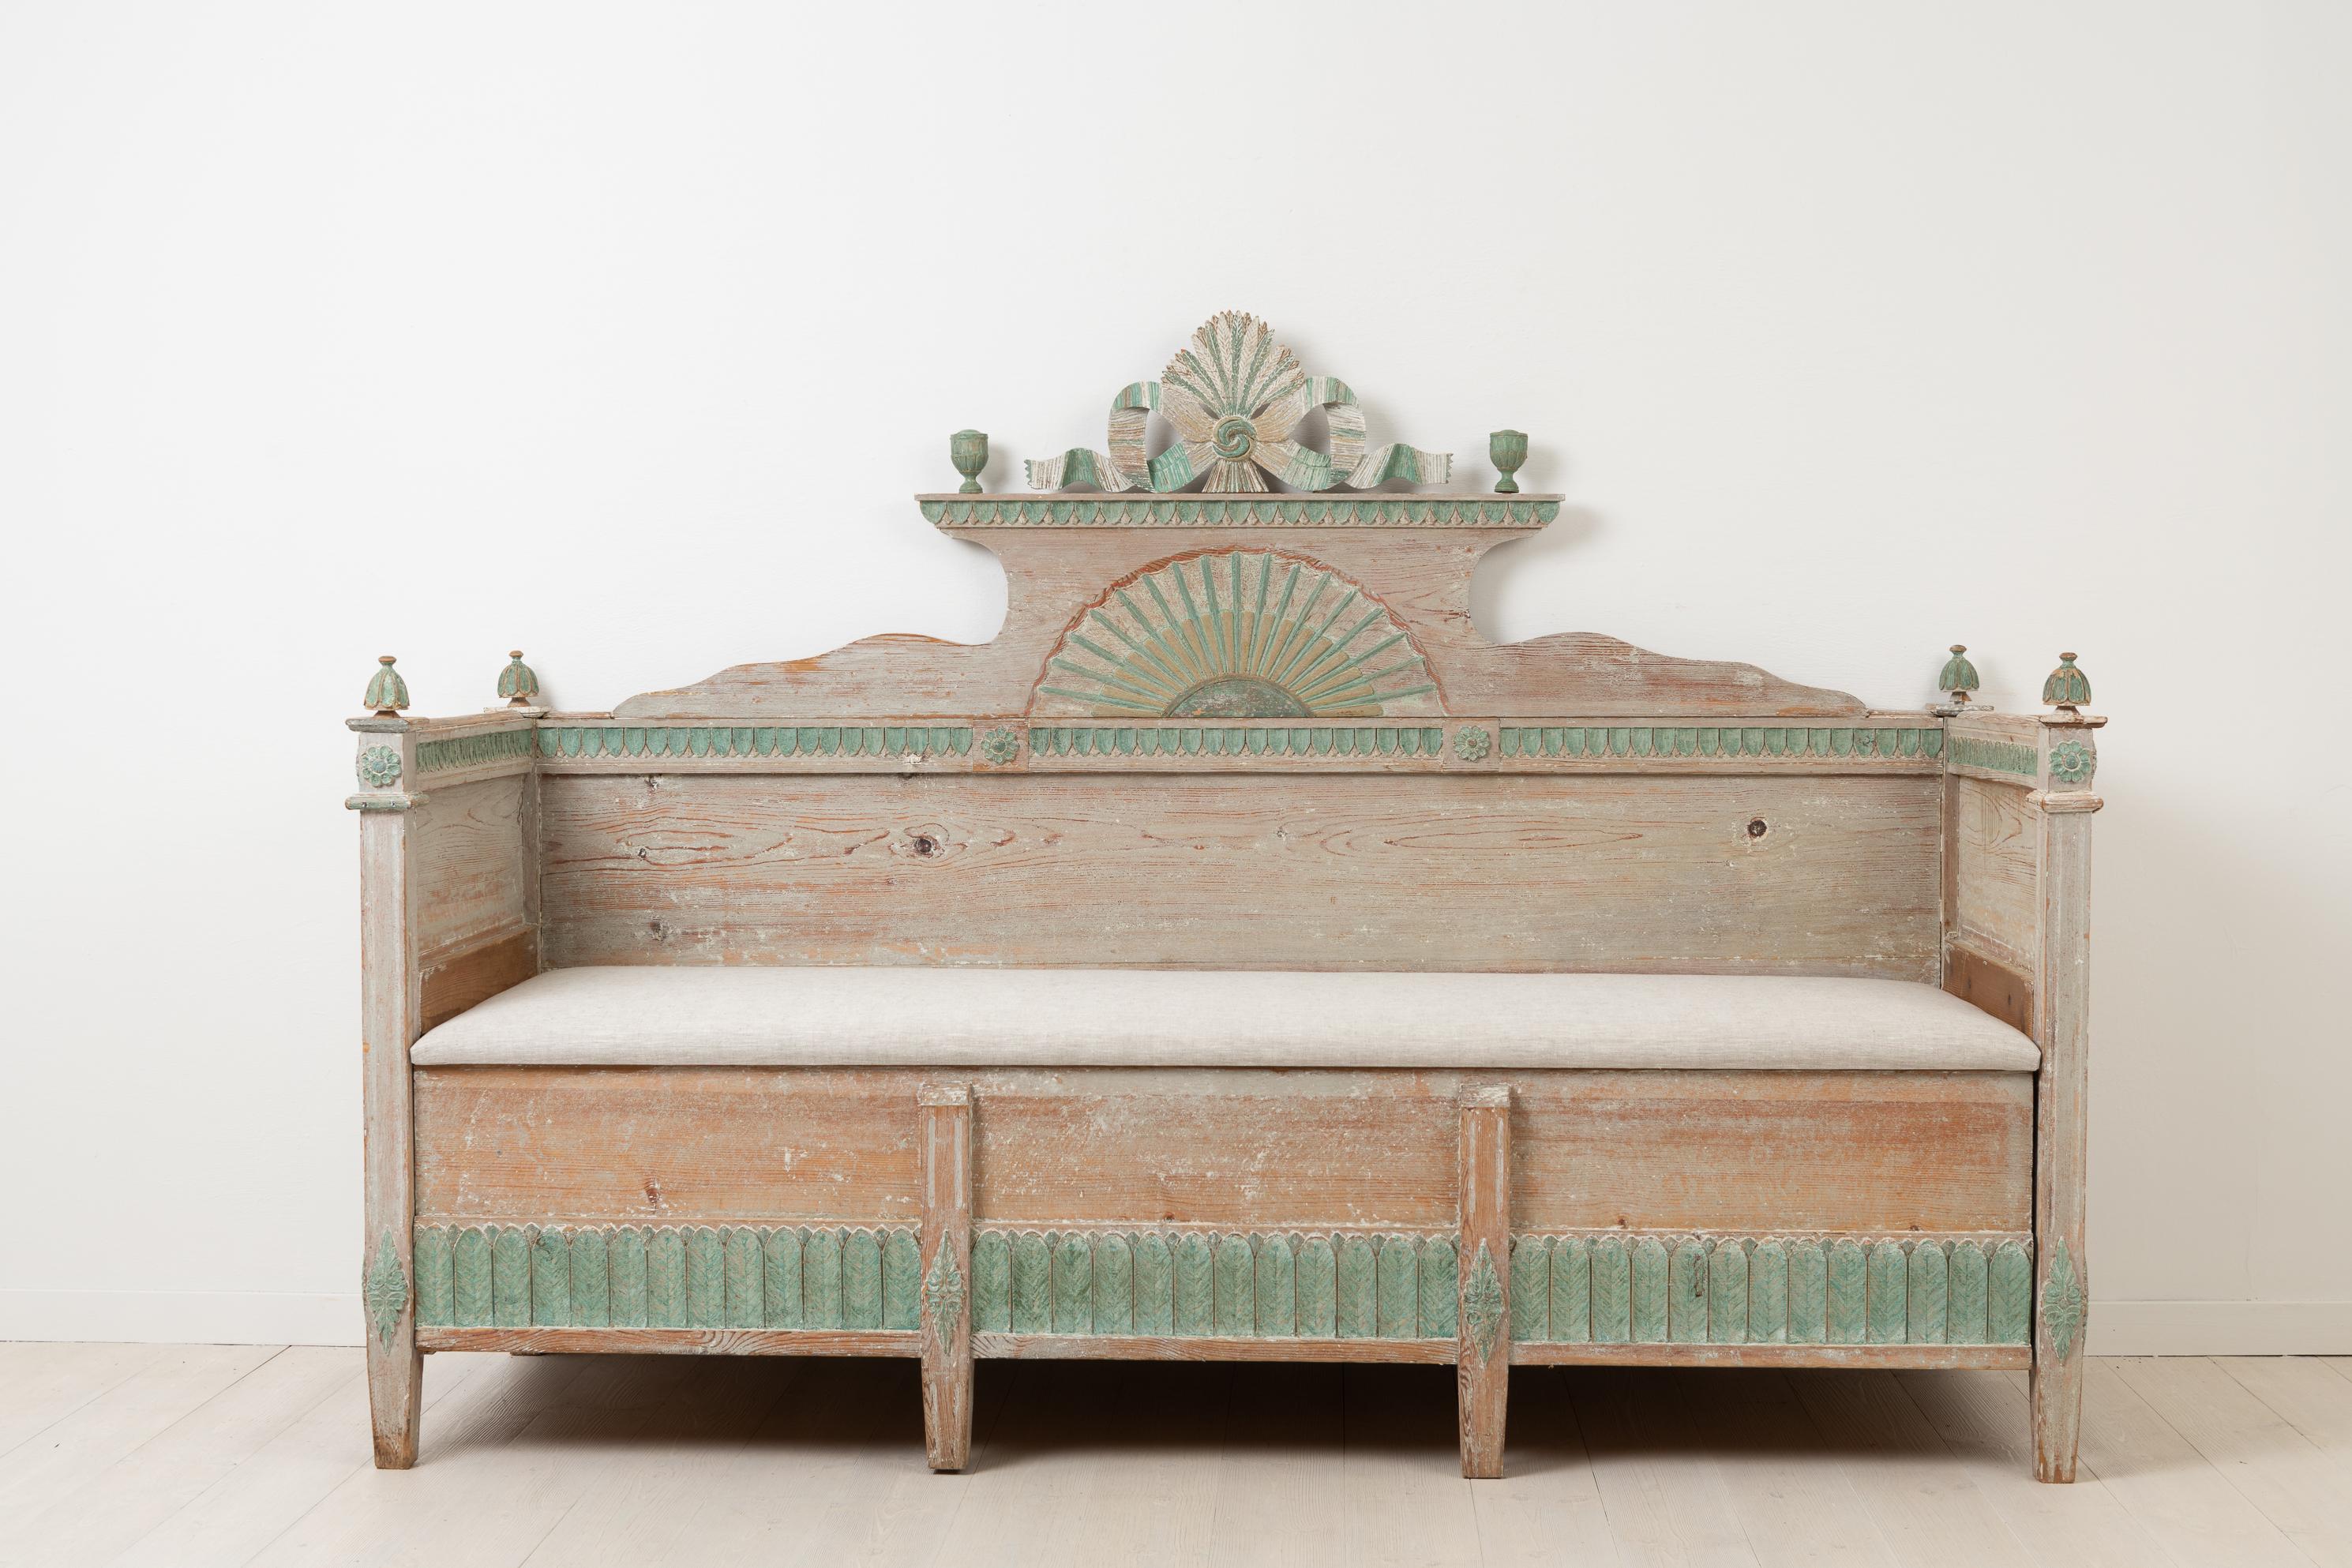 Neoclassical / Gustavian Swedish sofa. Made in painted pine with unusually many and detailed decorations. Dry scraped by hand to the first original layer of paint. The wooden carvings are very strong and pronounced making them stand out even more in